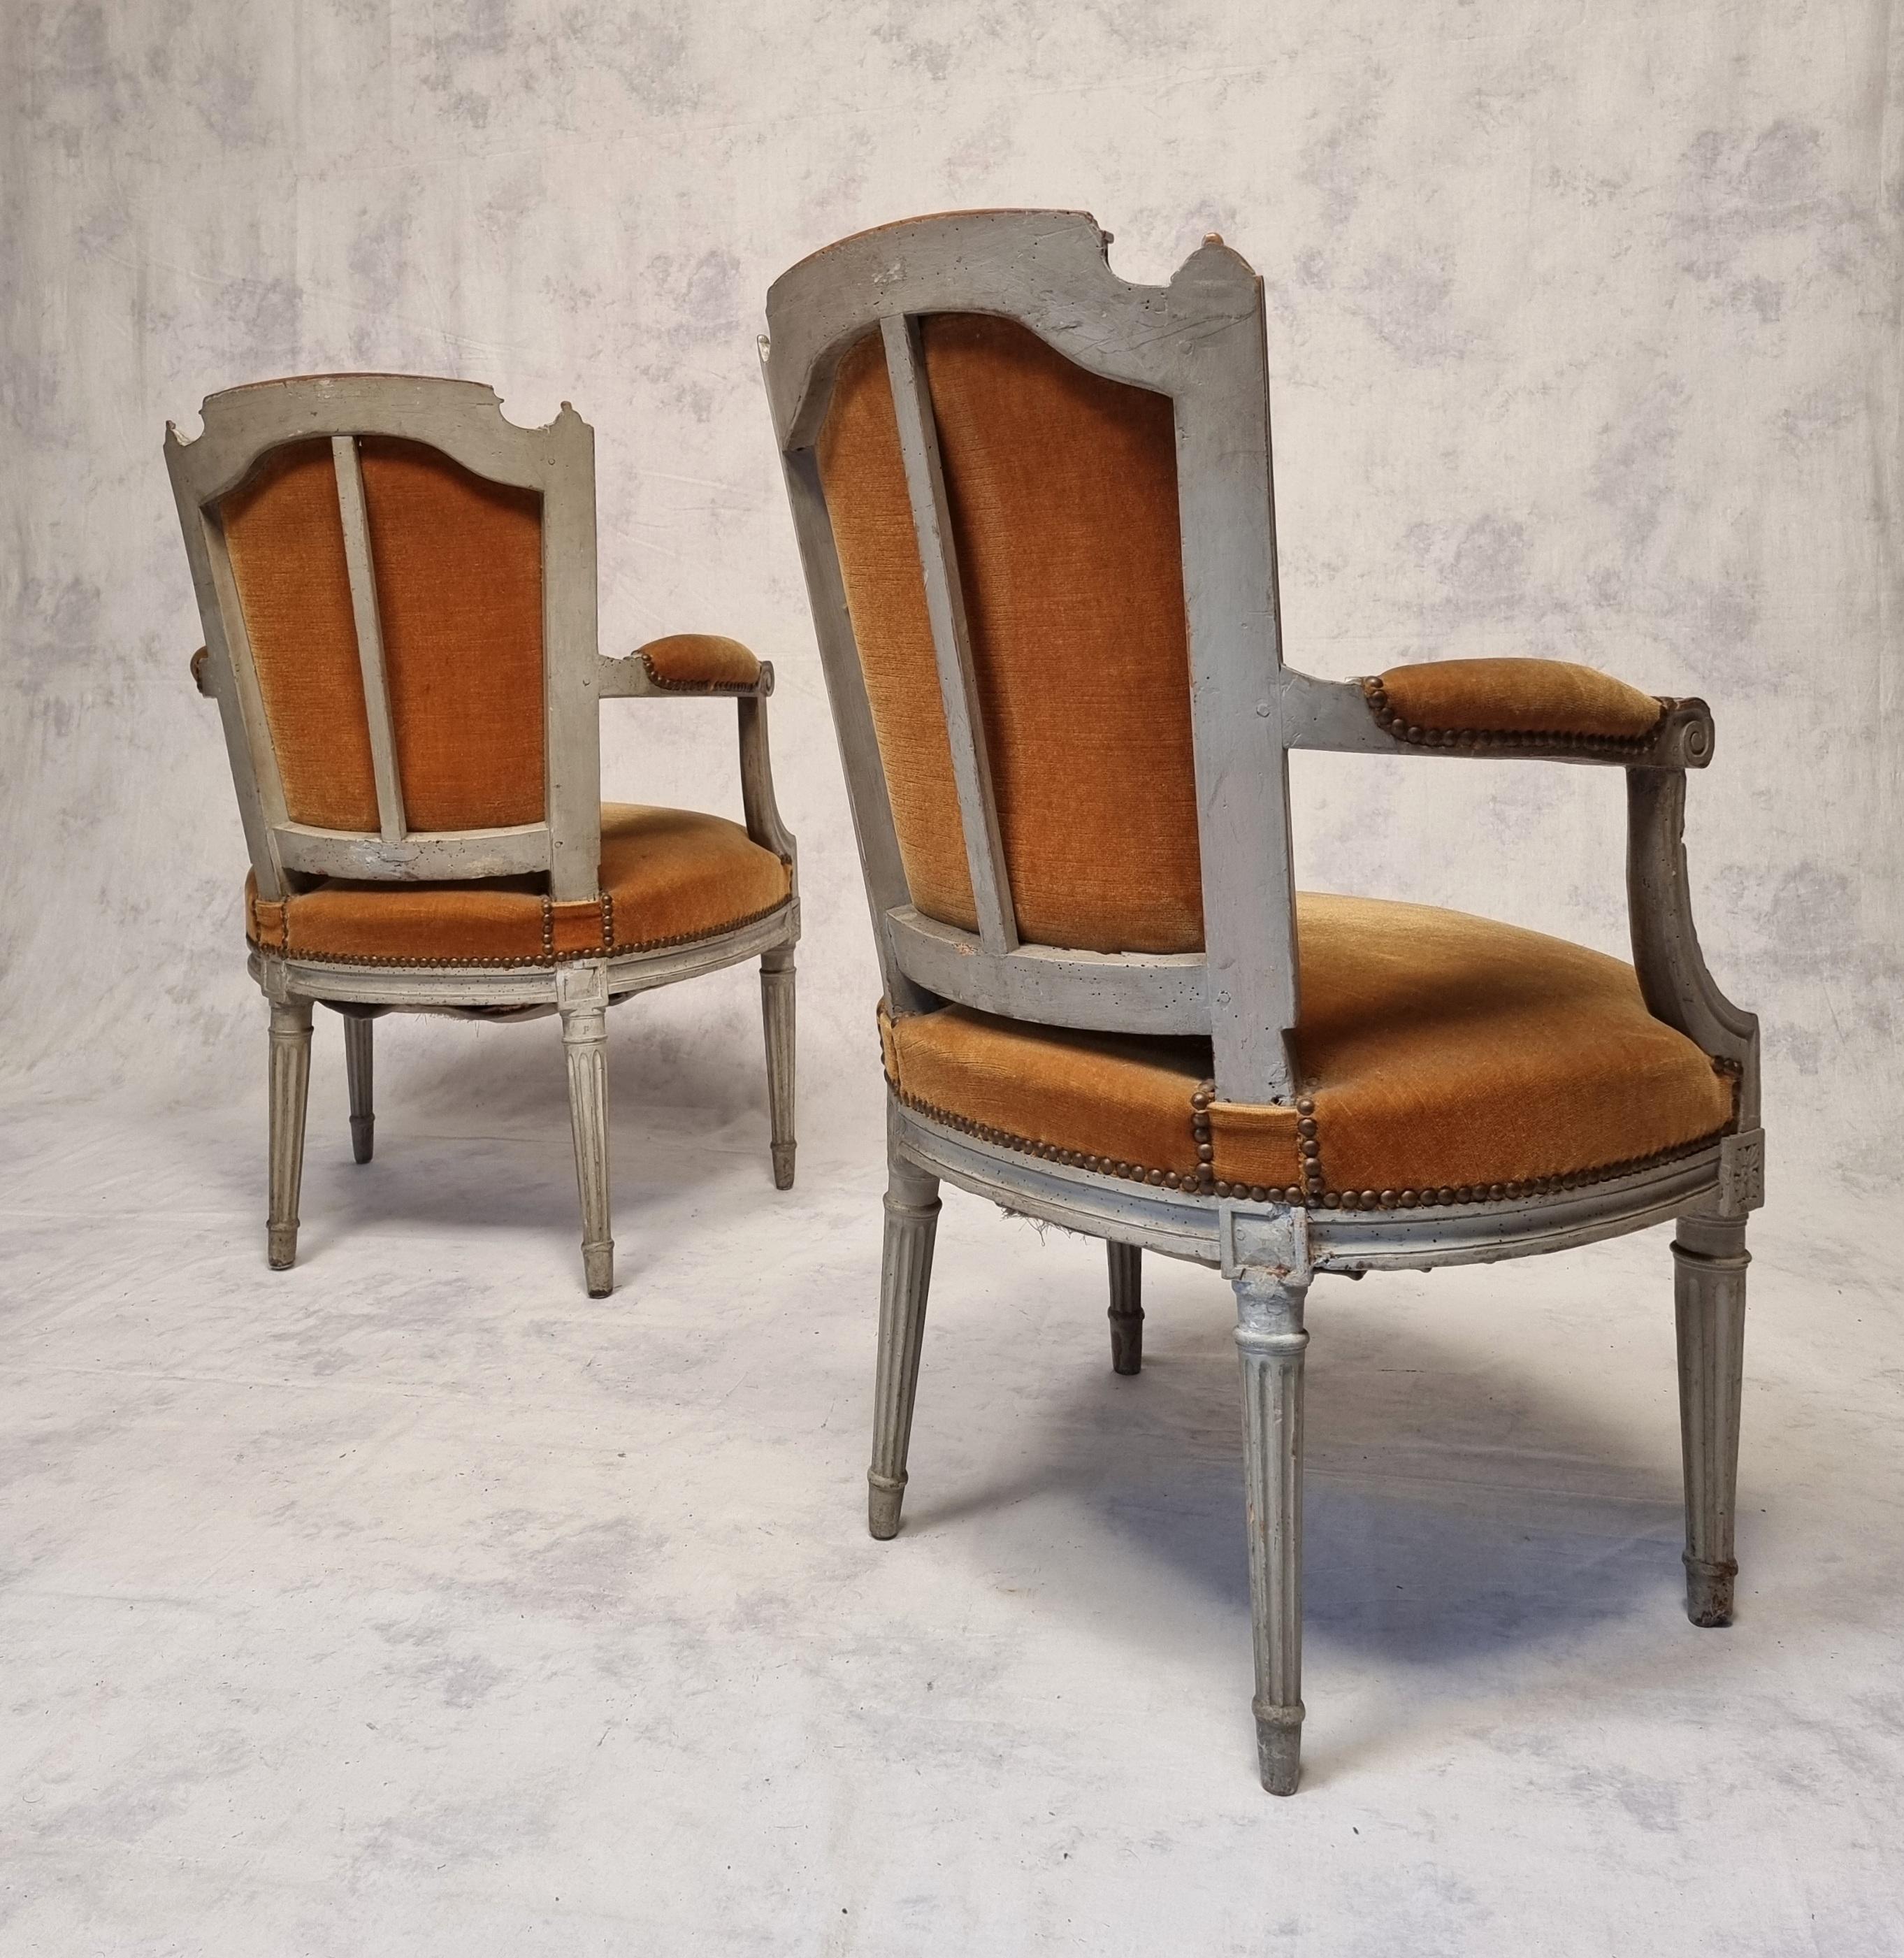 Pair of cabriolet armchairs with policeman's hat backrest, Louis XVI period. These armchairs are in original lacquered wood. They date from the end of the 18th century, around 1785. They have beautiful moldings. The feet are tapered fluted. Traces